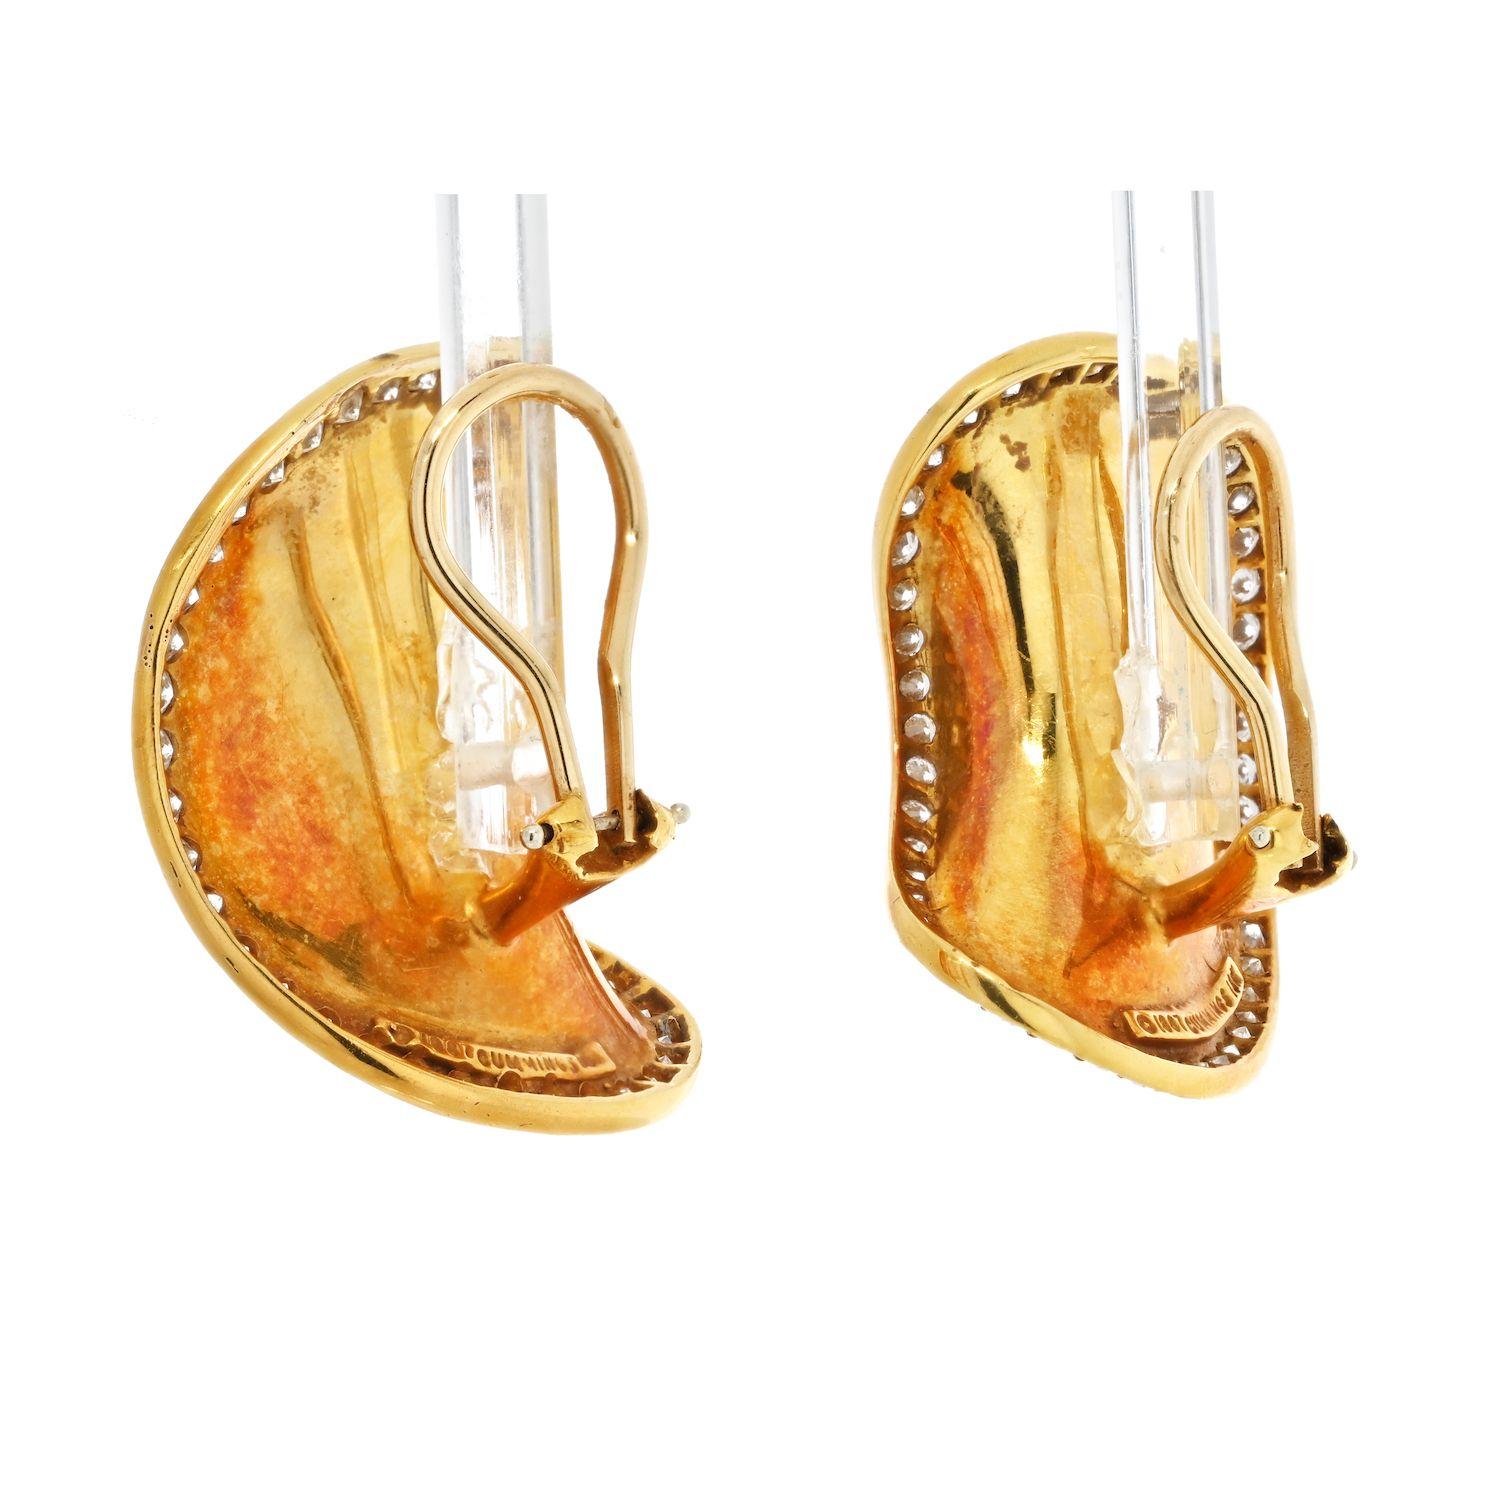 These 18k yellow gold diamond framed 1987 Angela Cummings earrings are truly special because they were designed by Cummings, an iconic jewelry designer known for her innovative and timeless designs. The earrings feature a unique bean shape design